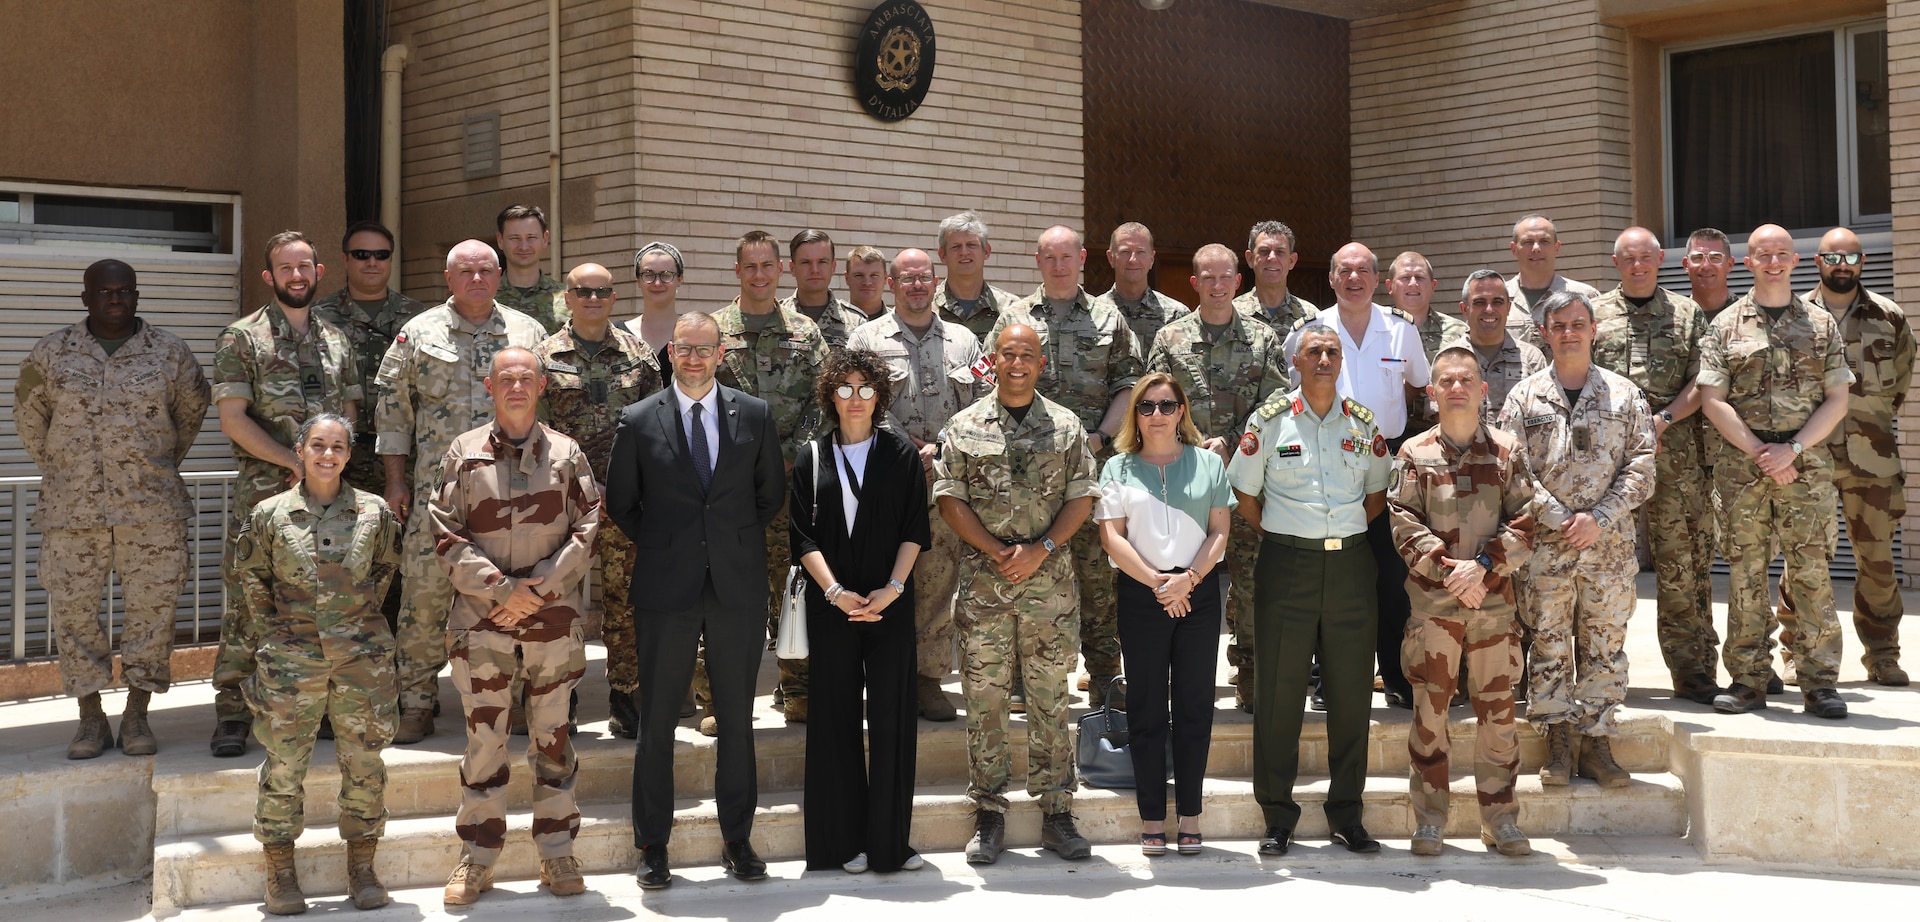 Attendees at a defense attaché forum hosted by Combined Joint Task Force - Operation Inherent Resolve (CJTF-OIR) pose for a photo July 19, 2022, in Baghdad, Iraq. The defense attaché forum brought together defense attachés from several Global Coalition countries as well as representatives from CJTF-OIR and interagency partners to discuss topics including the need for increased repatriation and reintegration of displaced persons in northeast Syria to reduce ISIS influence in those vulnerable populations; the threat of ISIS members in detention centers operated by Syrian Democratic Forces in northeast Syria; and the need for greater international action to address these ongoing security and humanitarian challenges. (U.S. Army photo by Sgt. Brian Reed)